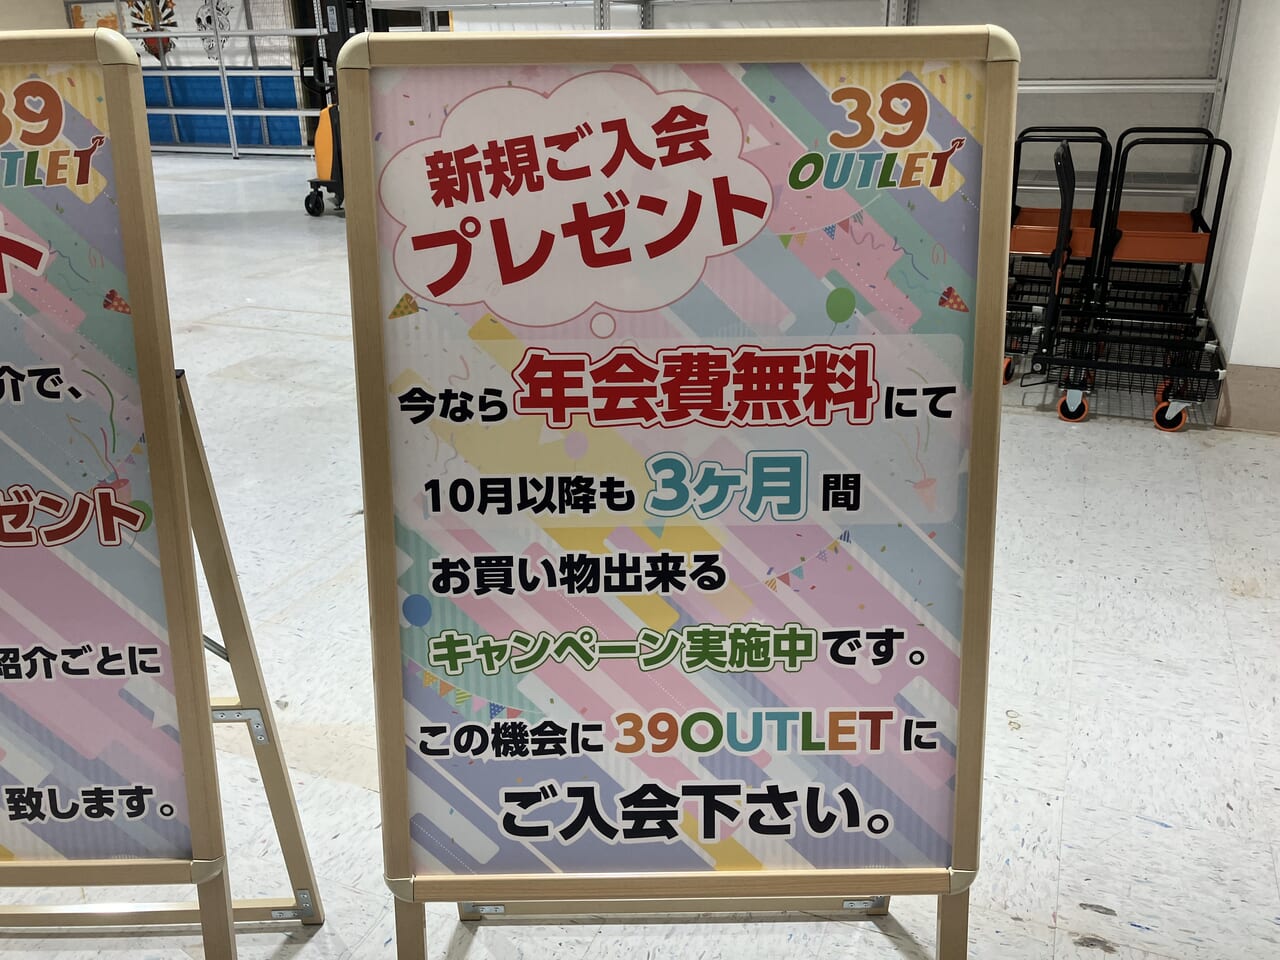 39OUTLET